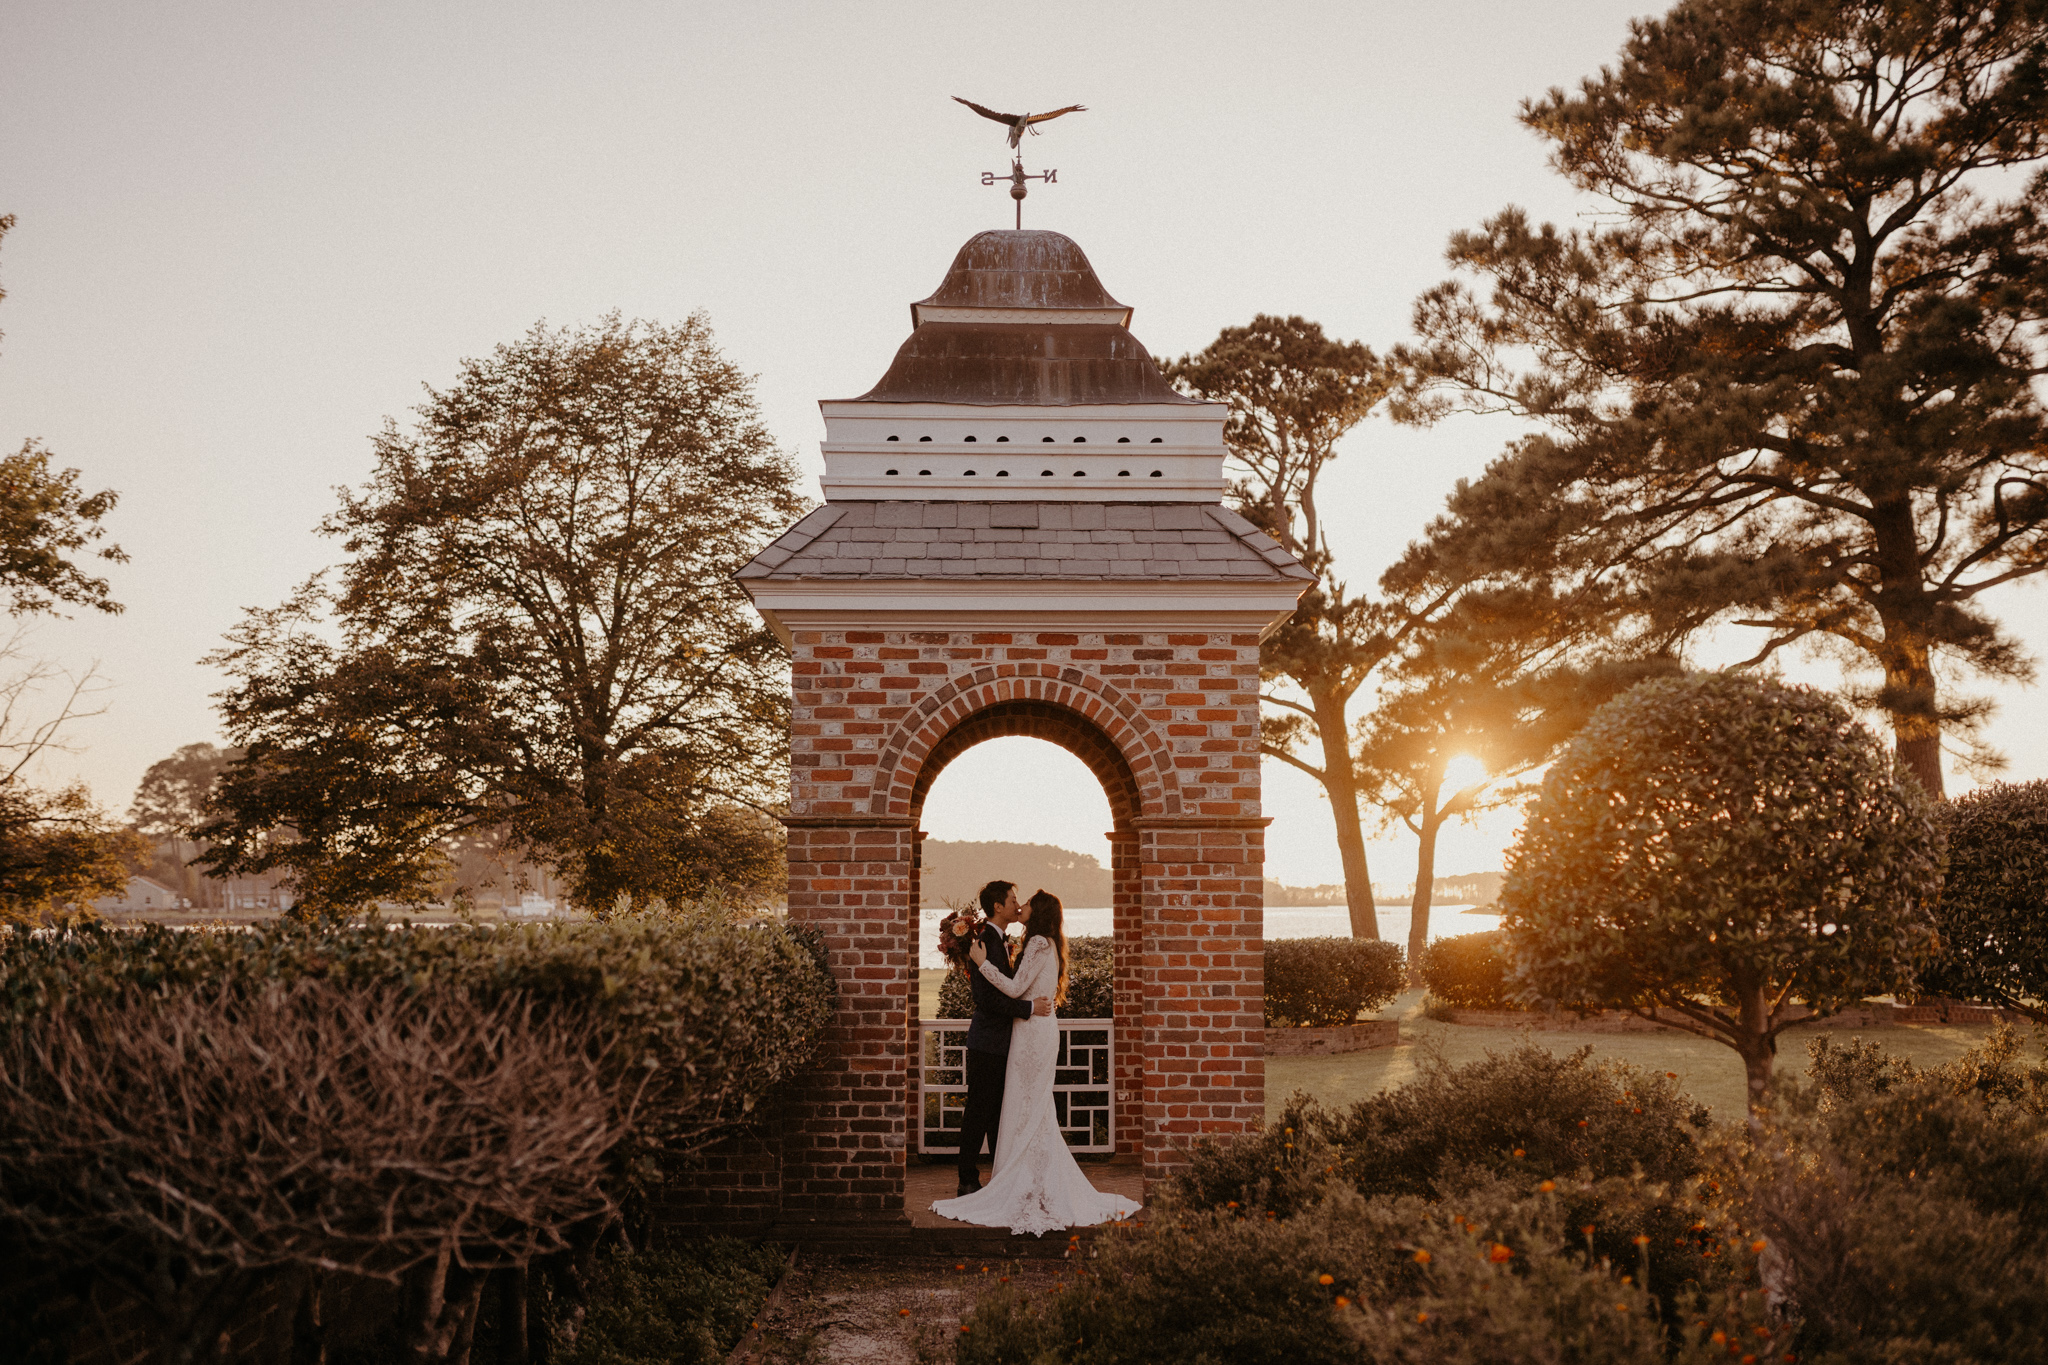 Vintage and whimsical waterfront wedding on Maryland’s eastern shore with a gorgeous golden hour